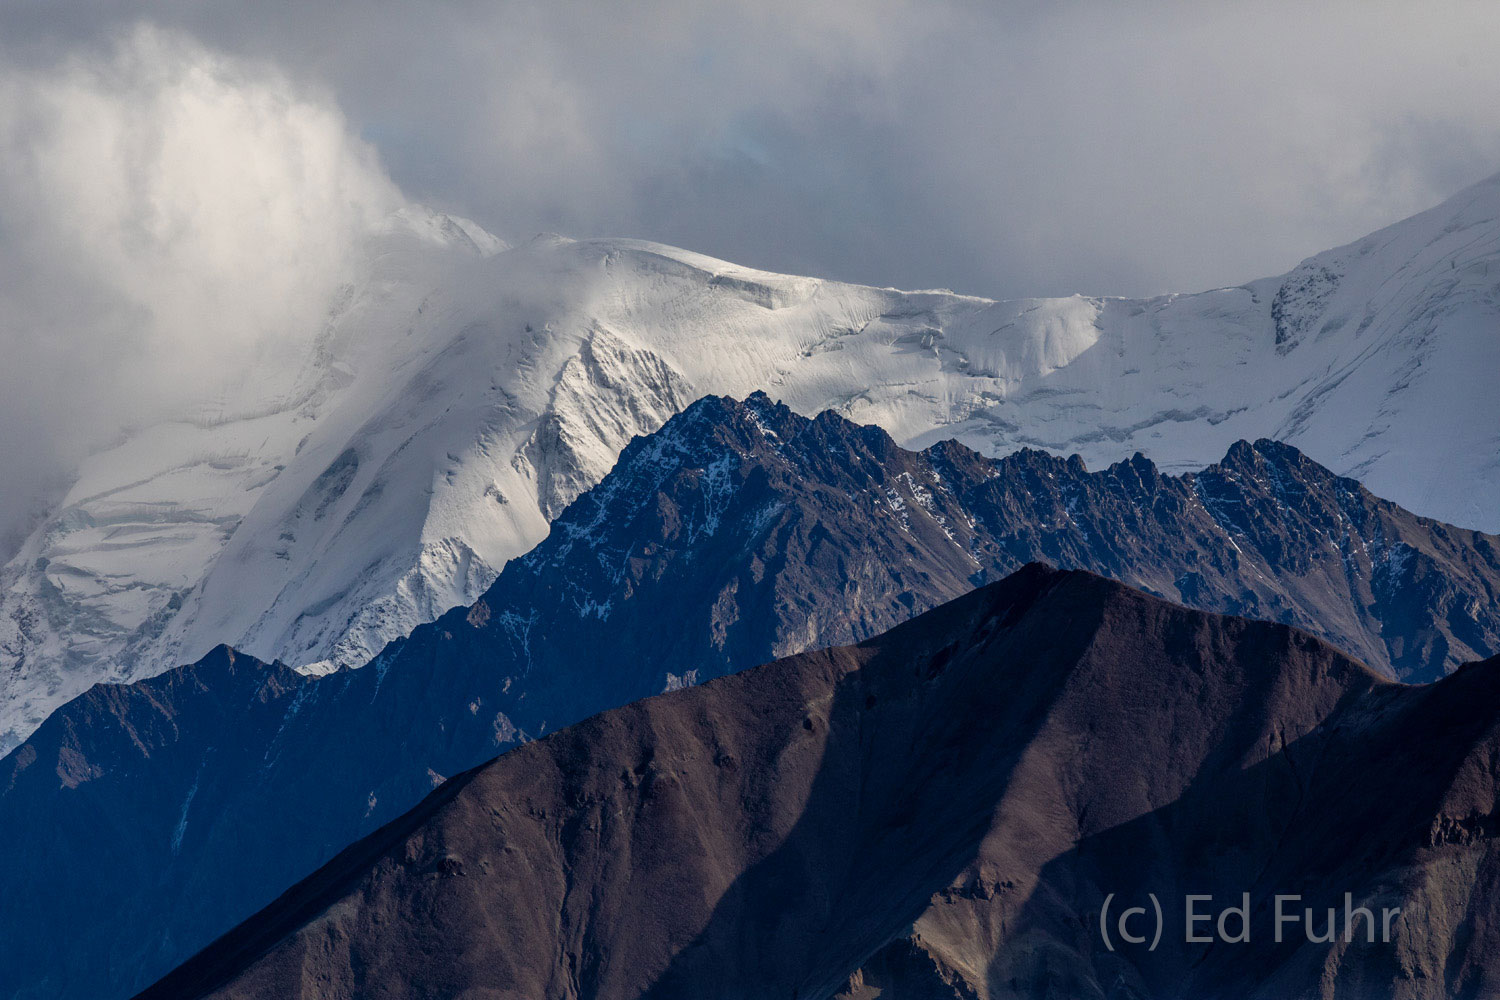 The high peaks of the Alaskan Range have already received their first new snow of the season.